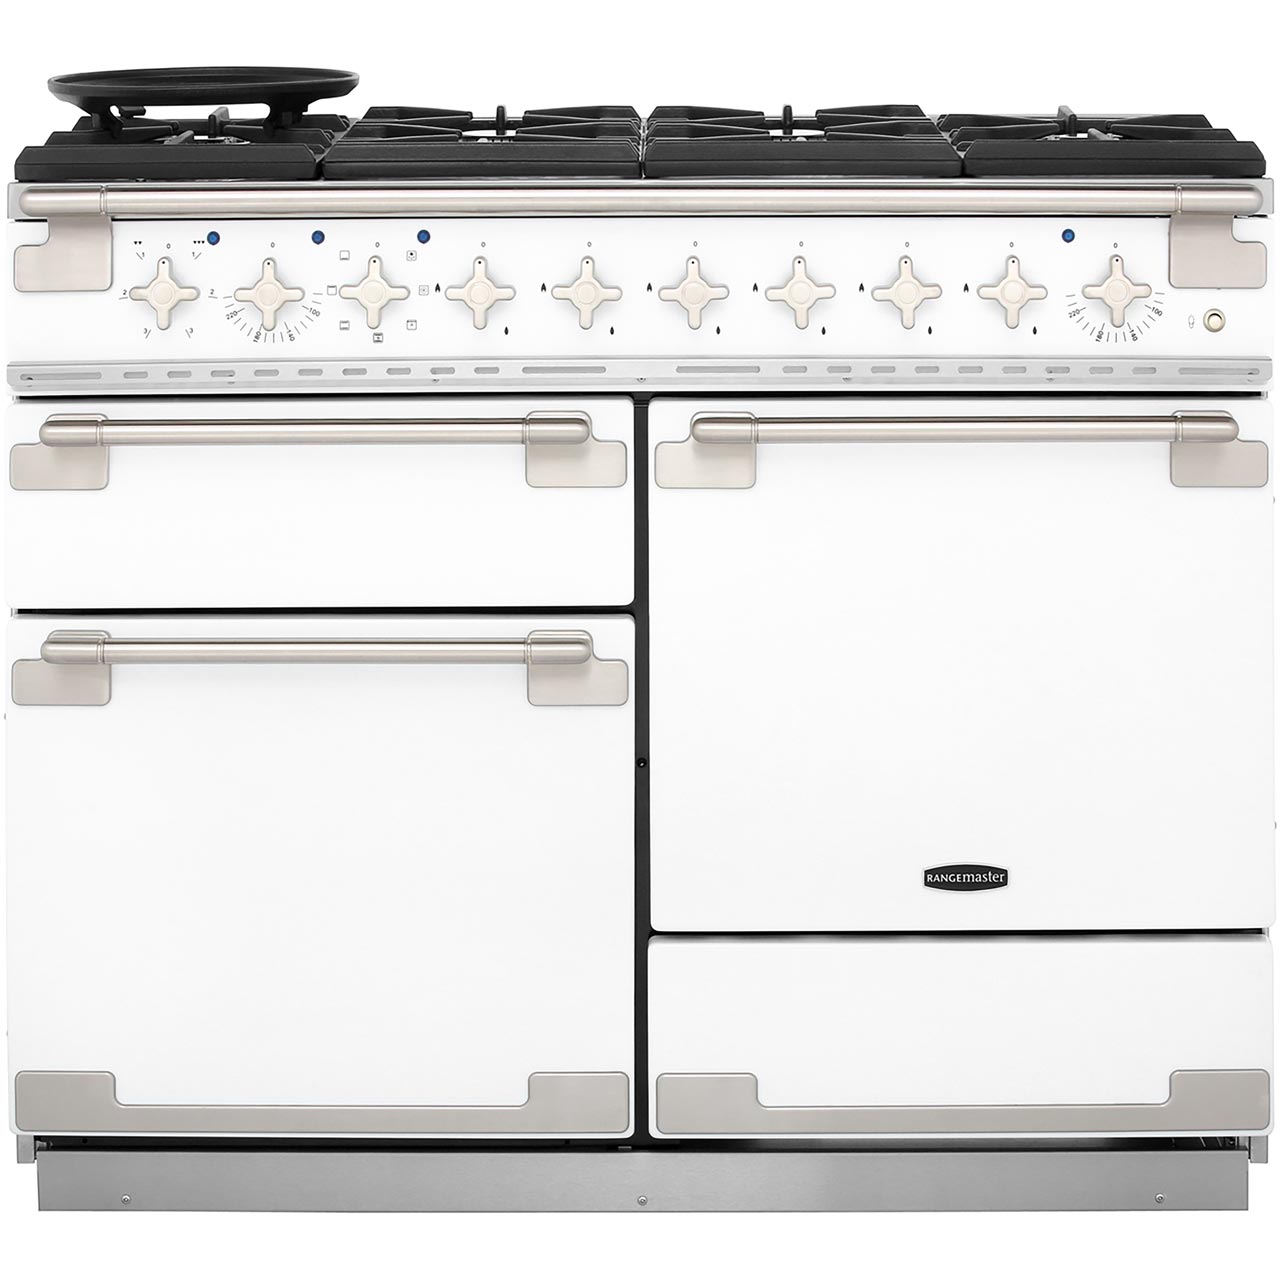 Rangemaster Elise ELS110DFFWH 110cm Dual Fuel Range Cooker - White - A/A Rated, White